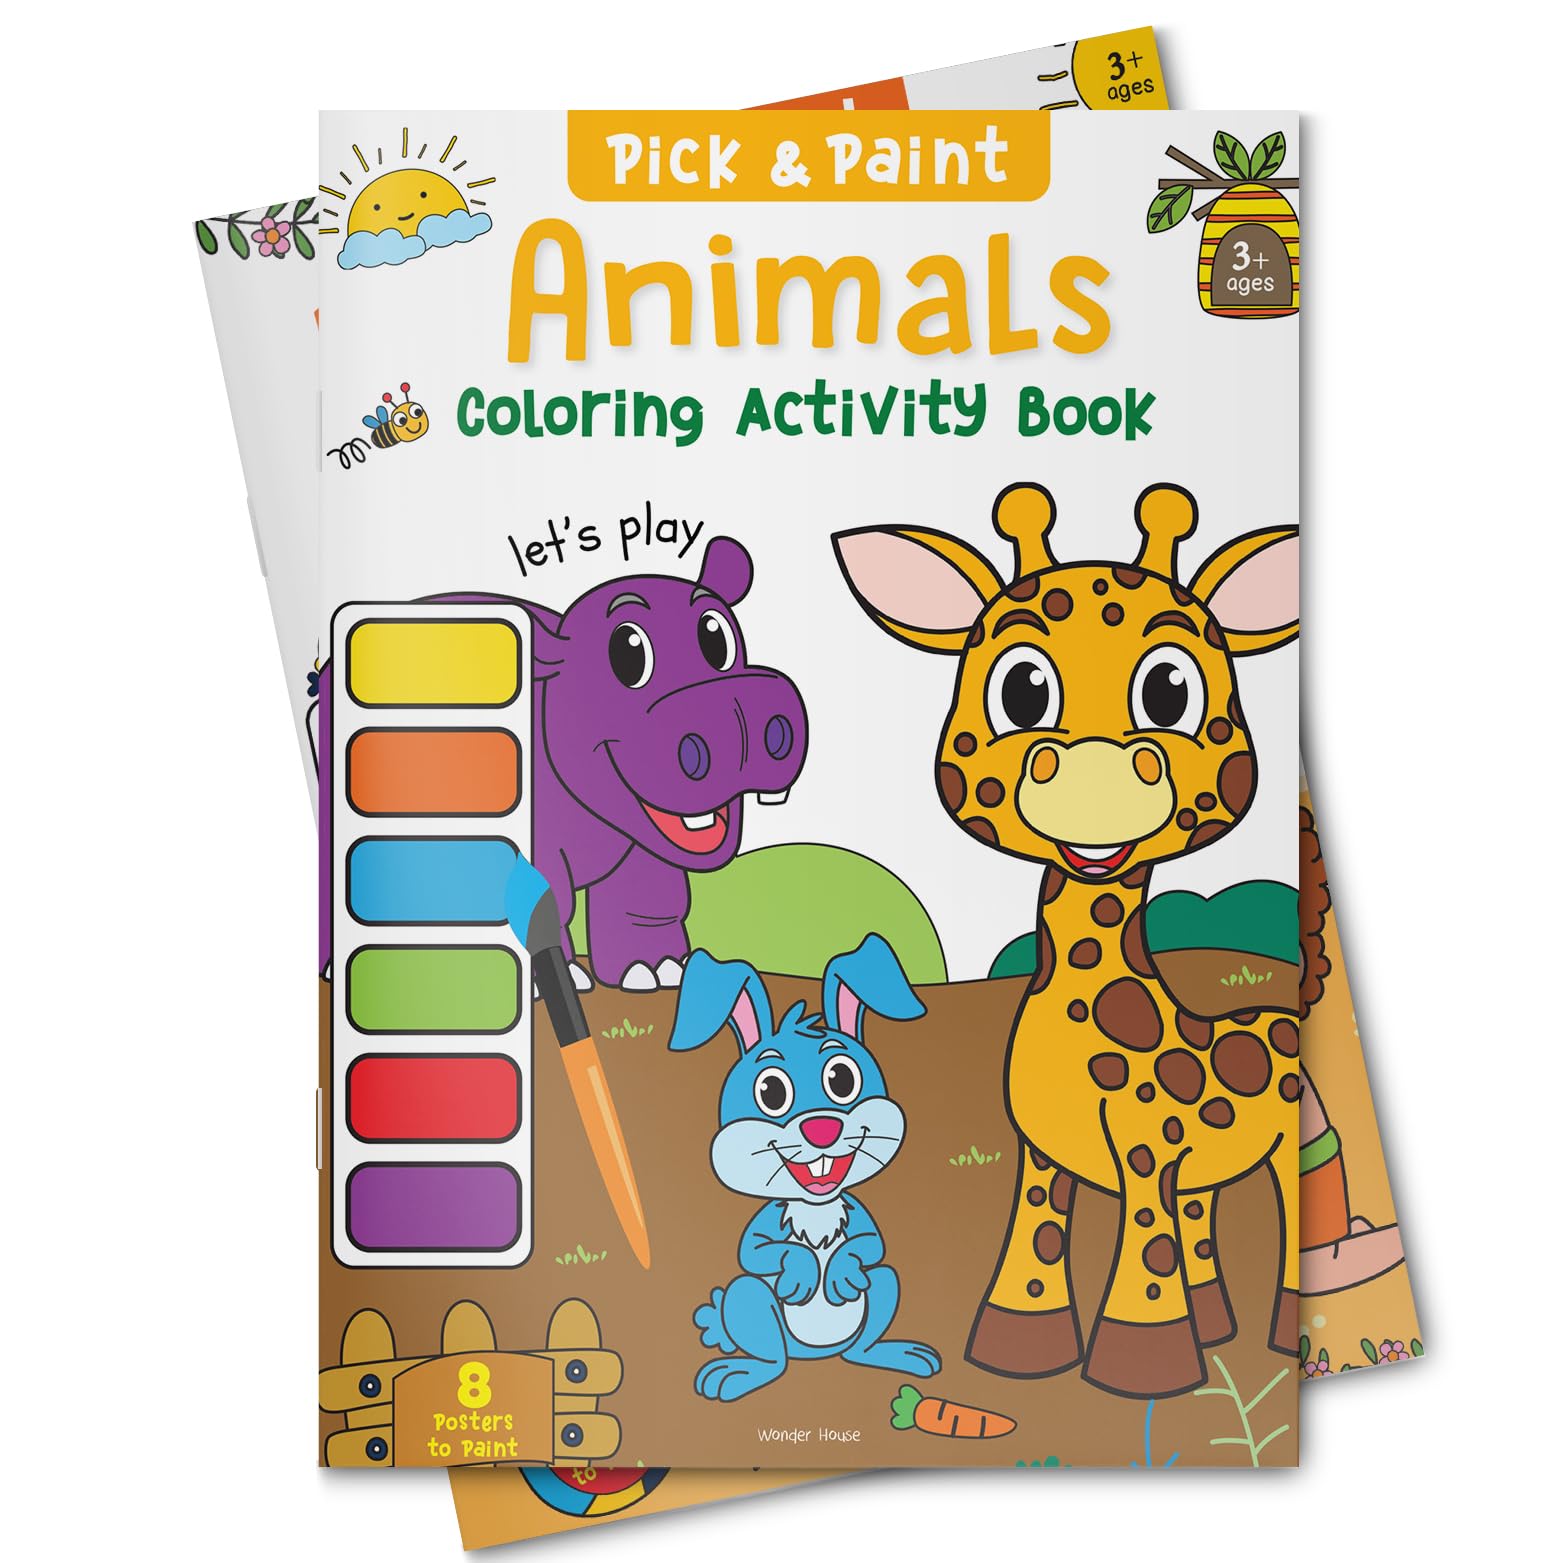 Animals: Pick and Paint Coloring Activity Book